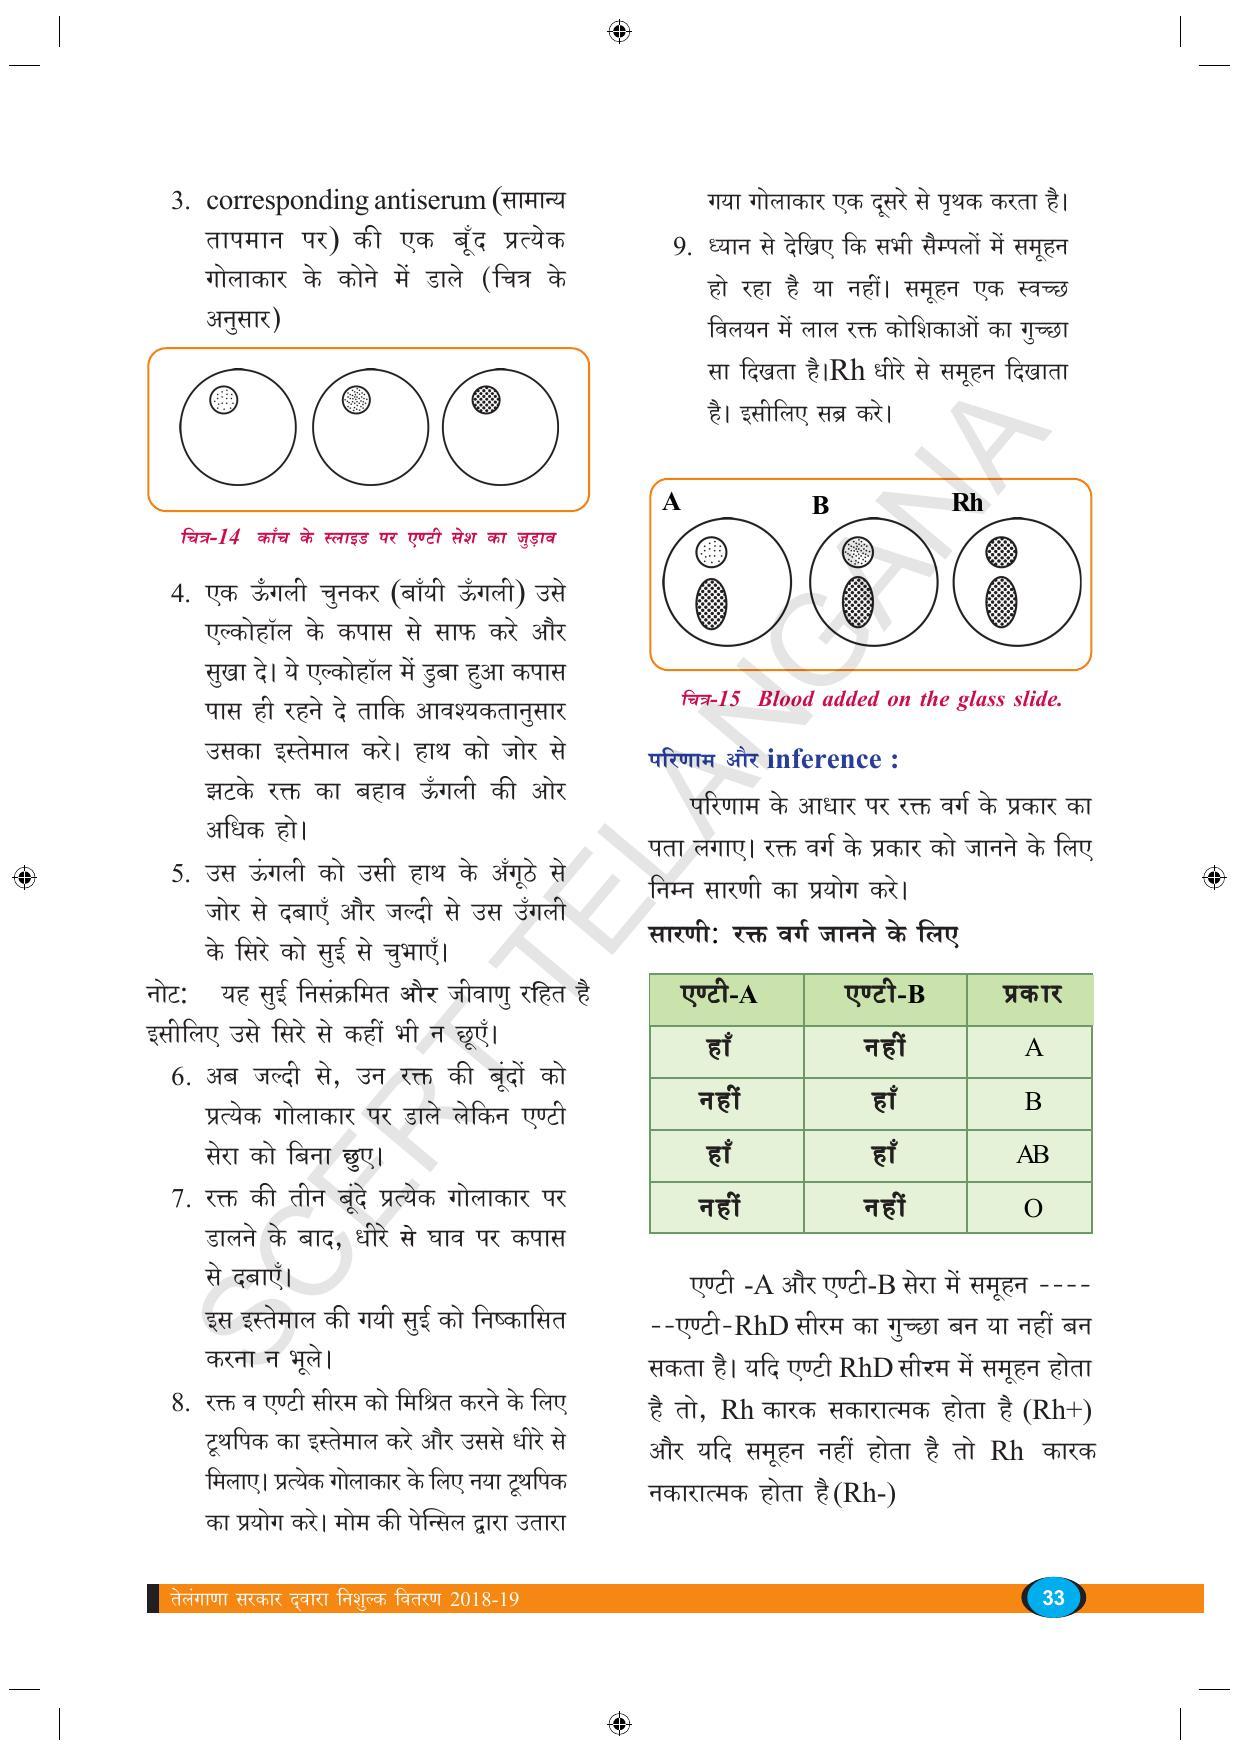 TS SCERT Class 9 Biological Science (Hindi Medium) Text Book - Page 45